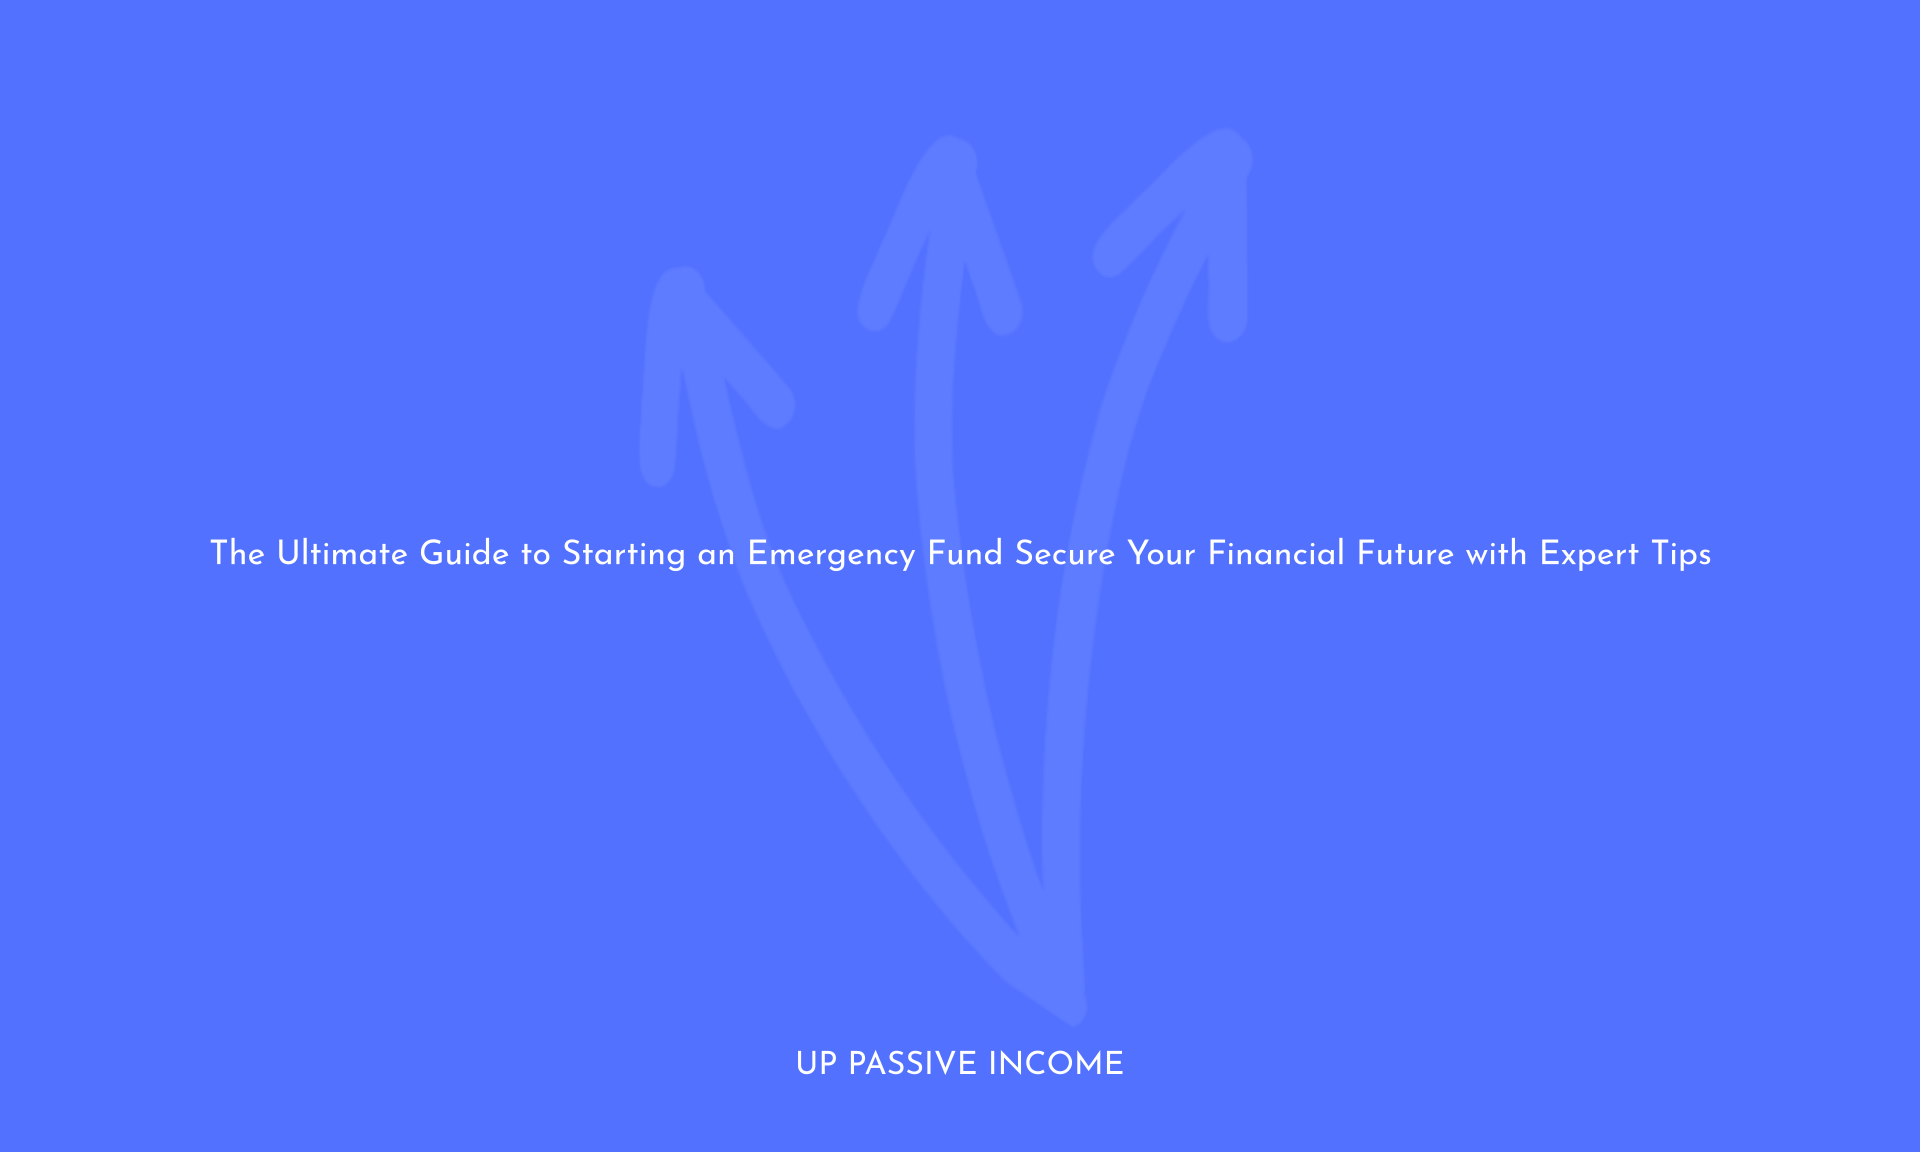 emergency fund, financial future, expert tips